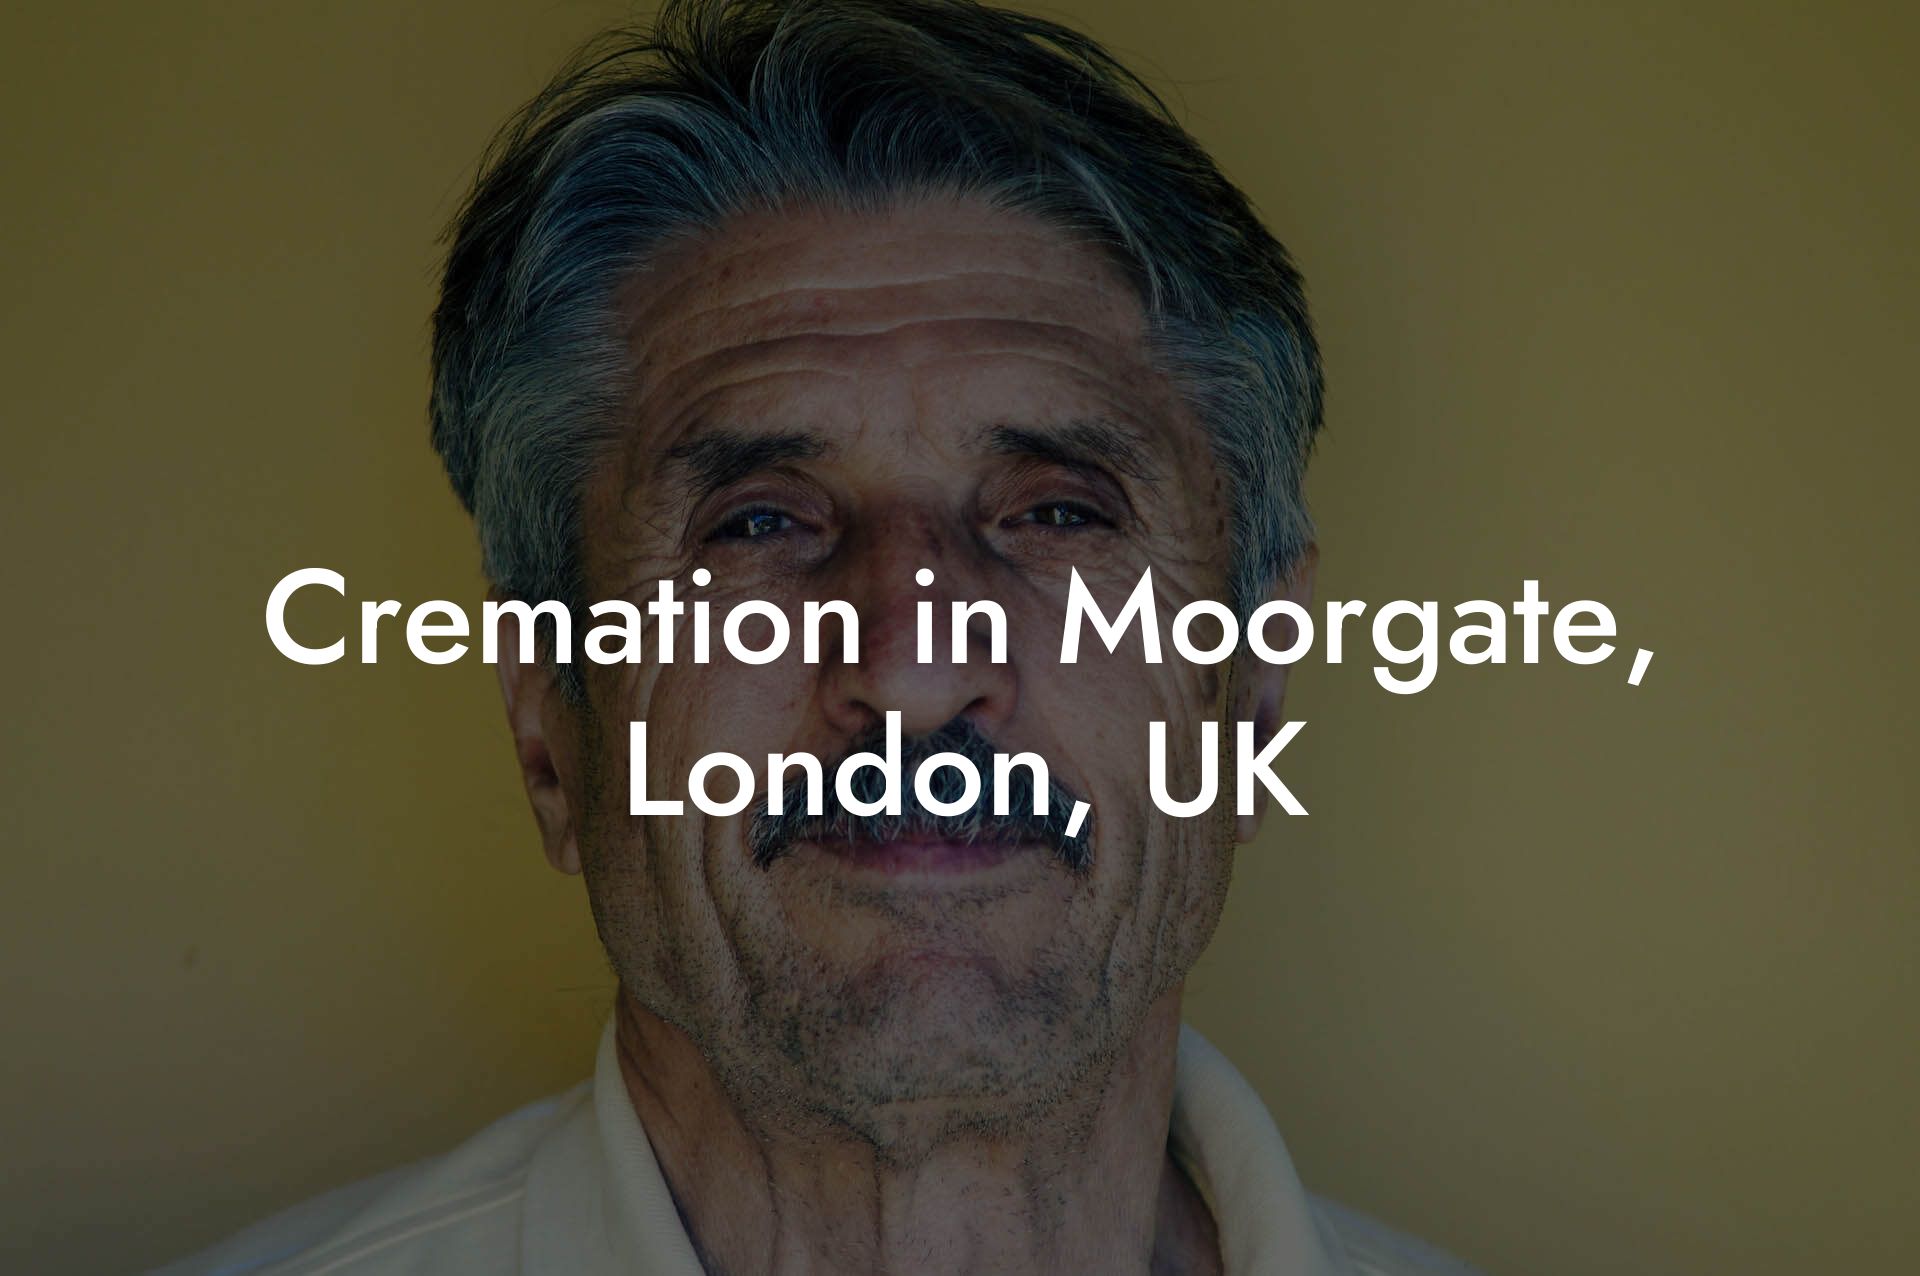 Cremation in Moorgate, London, UK